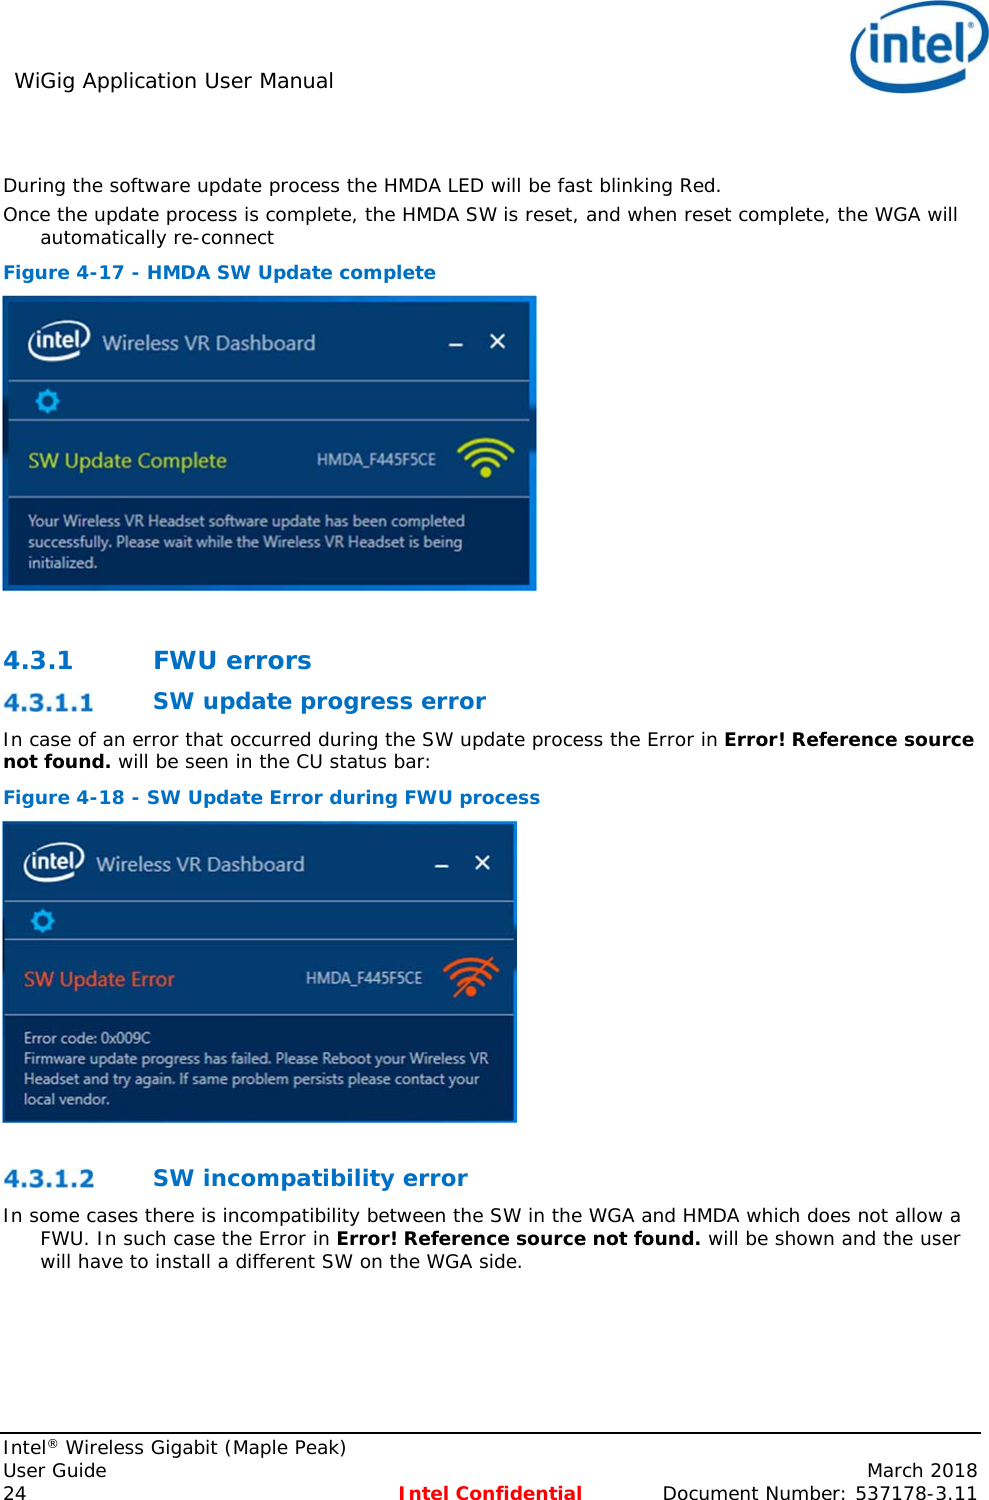 WiGig Application User Manual     Intel® Wireless Gigabit (Maple Peak) User Guide    March 2018 24 Intel Confidential  Document Number: 537178-3.11  During the software update process the HMDA LED will be fast blinking Red. Once the update process is complete, the HMDA SW is reset, and when reset complete, the WGA will automatically re-connect  Figure 4-17 - HMDA SW Update complete   4.3.1 FWU errors  SW update progress error In case of an error that occurred during the SW update process the Error in Error! Reference source not found. will be seen in the CU status bar: Figure 4-18 - SW Update Error during FWU process    SW incompatibility error In some cases there is incompatibility between the SW in the WGA and HMDA which does not allow a FWU. In such case the Error in Error! Reference source not found. will be shown and the user will have to install a different SW on the WGA side. 